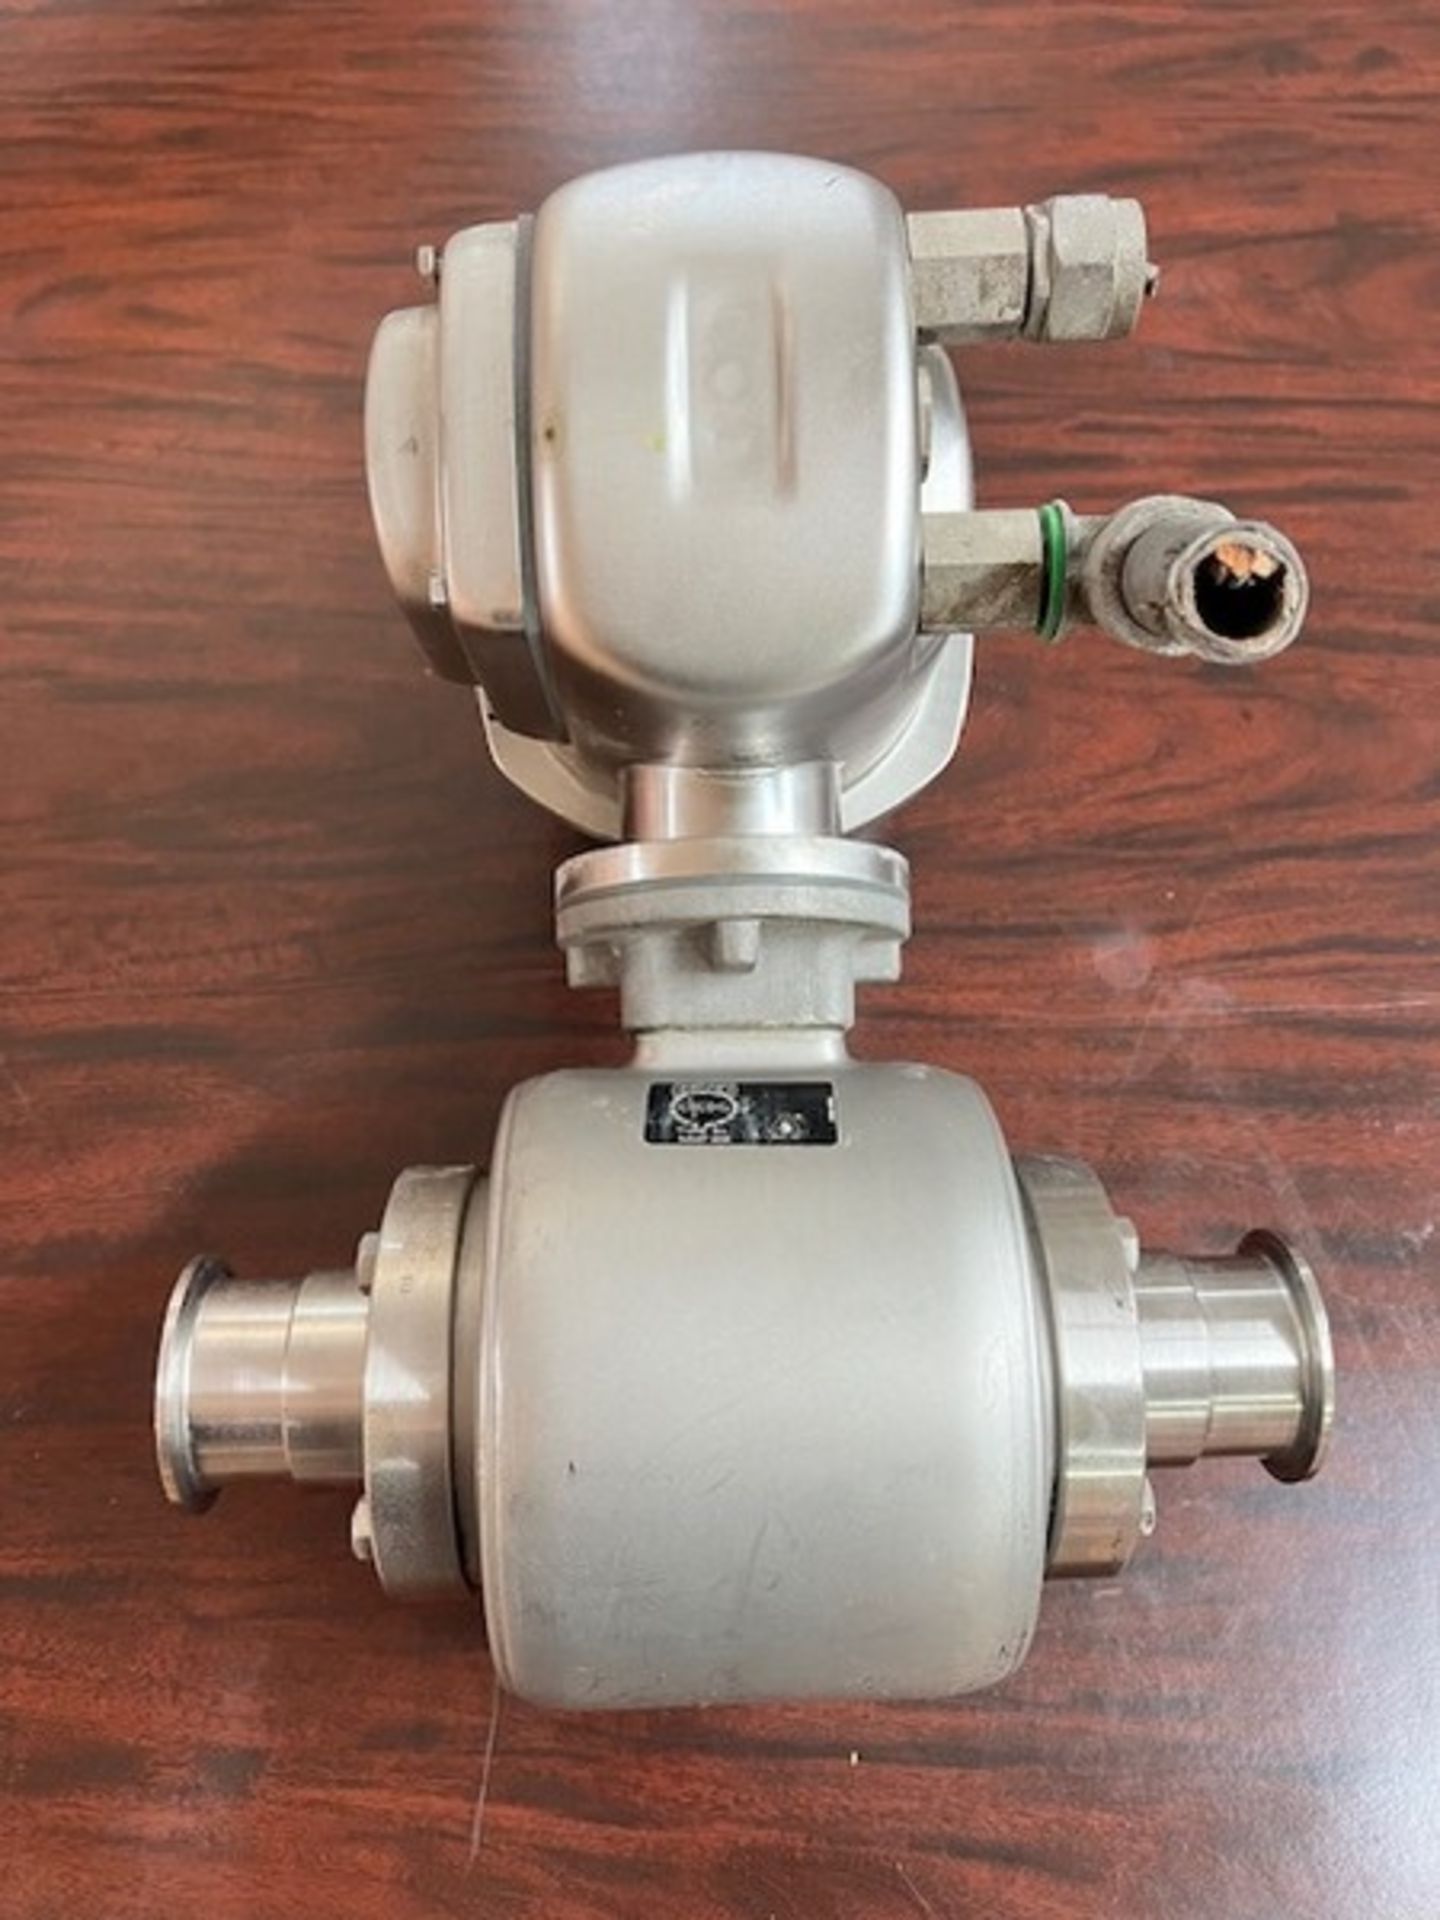 Endress+Hauser 2" Pro Mag H Flow Tube with Endress+Hauser Pro Mag 53 Transmitter, S/N C400571600 ( - Image 4 of 4